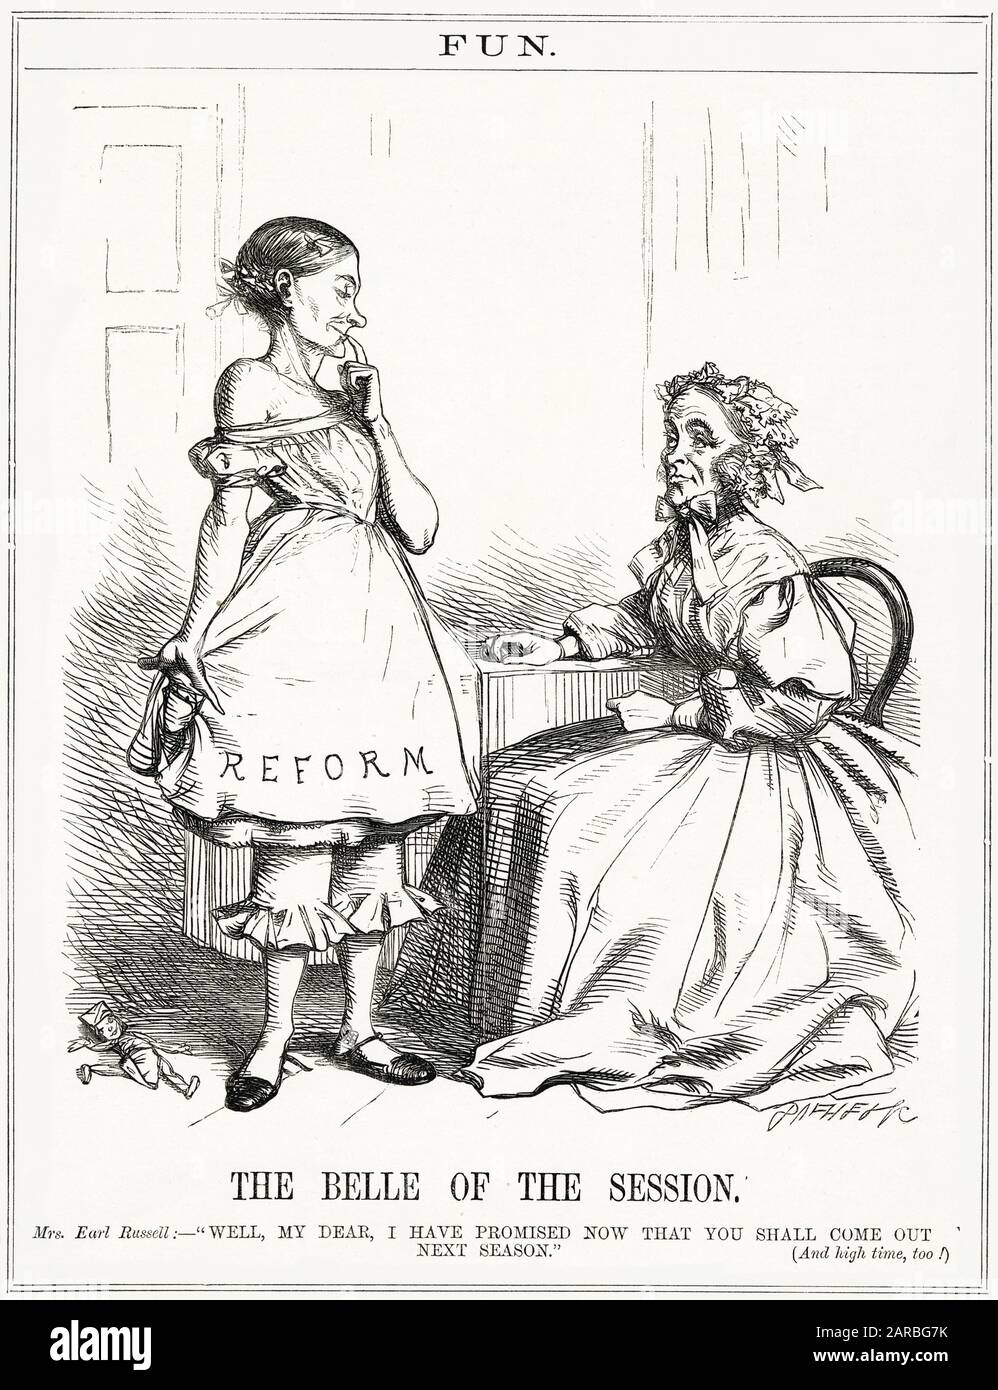 Cartoon, The Belle of the Season -- a satirical comment on Lord John Russell's promise that reform measures will be taken in the next parliamentary session. However, his idea of reform is shown to be rather unappealing, and a working man toy discarded on the floor does not bode well for an extension of the franchise in that direction. Stock Photo